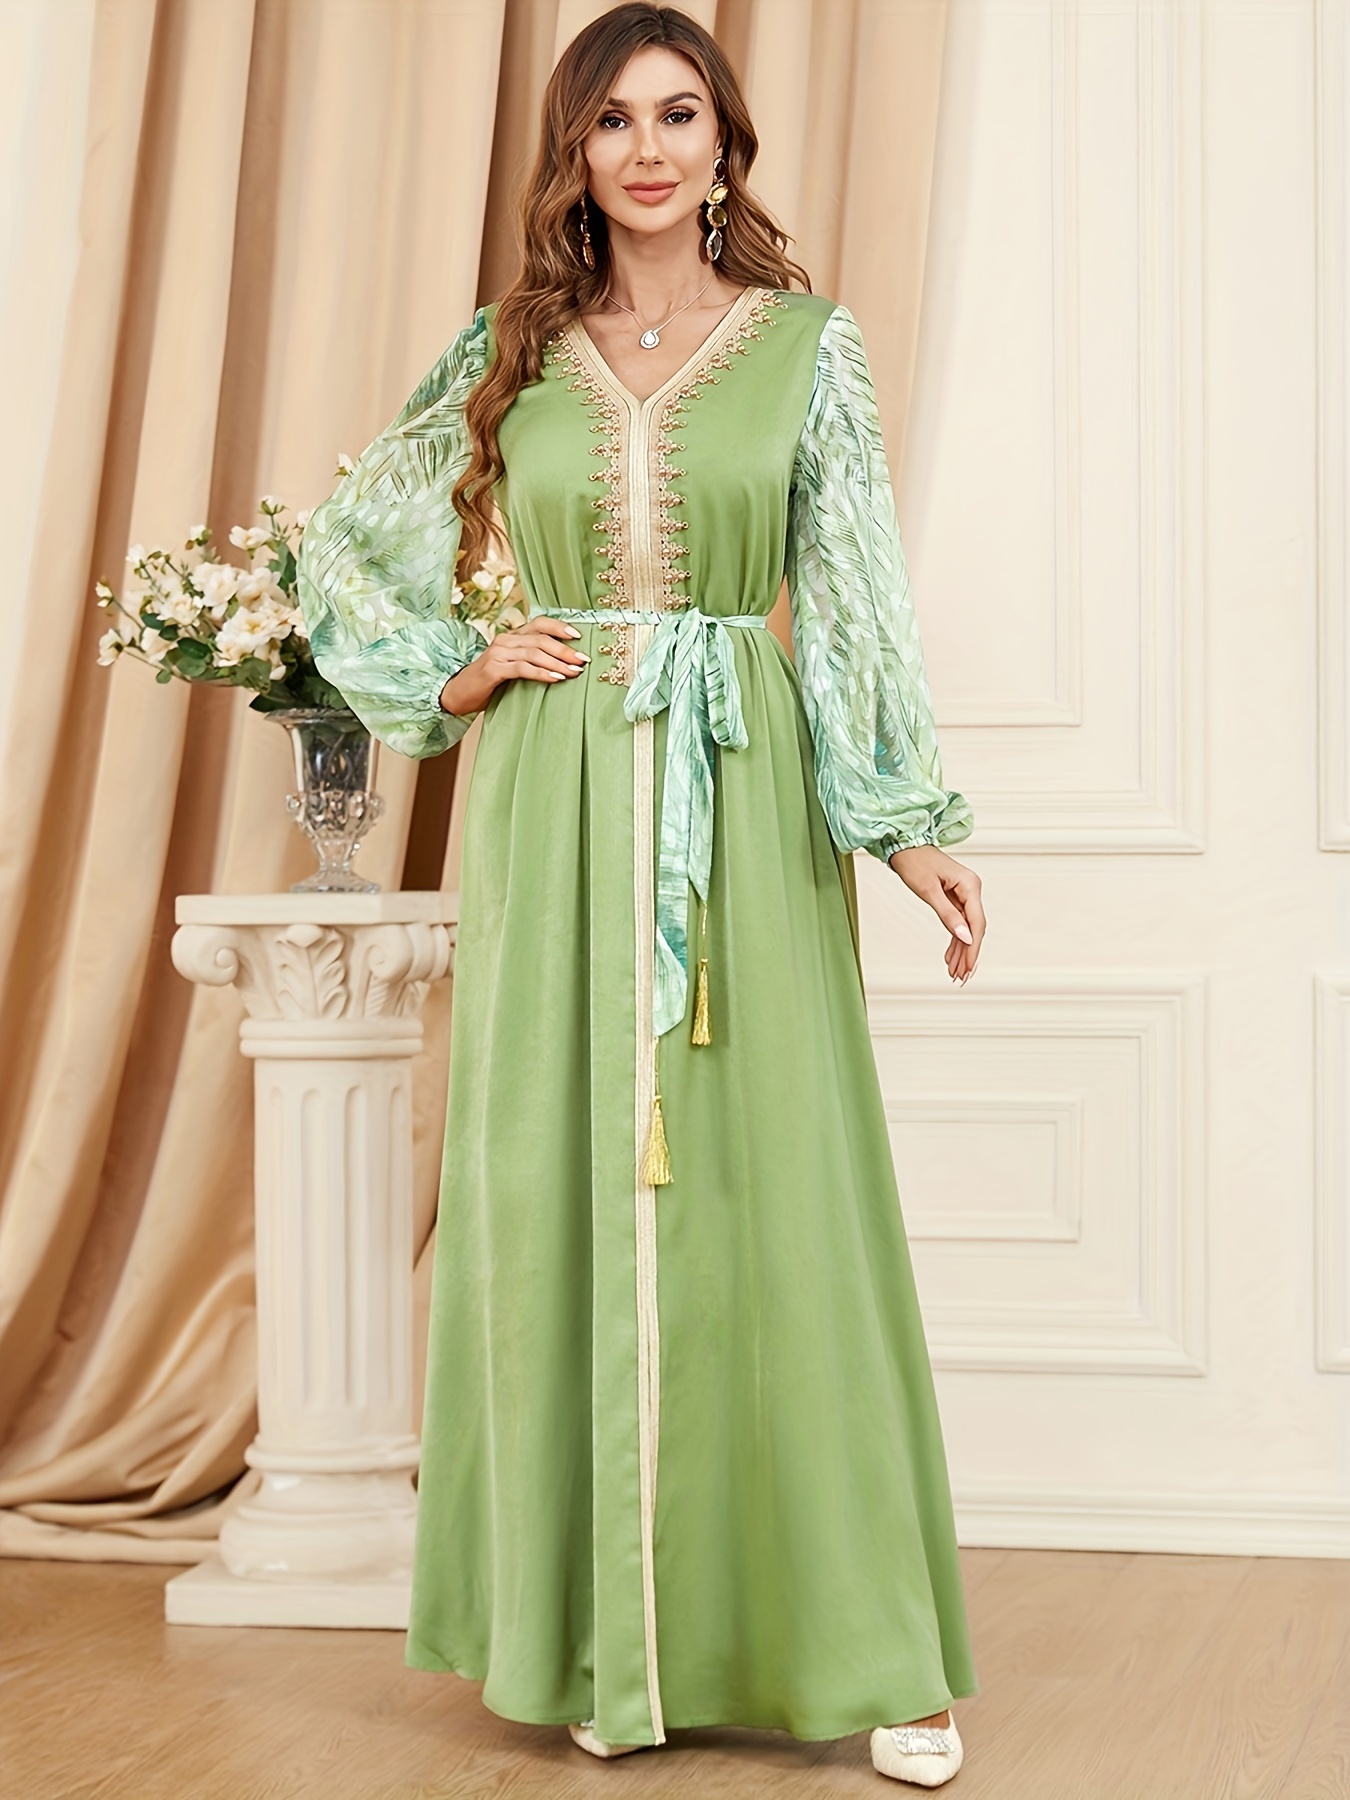 Gold Embroidered Kaftan Elegant Long Dress, Loose Maxi Vacation Dress For  Summer & Spring, Women's Clothing